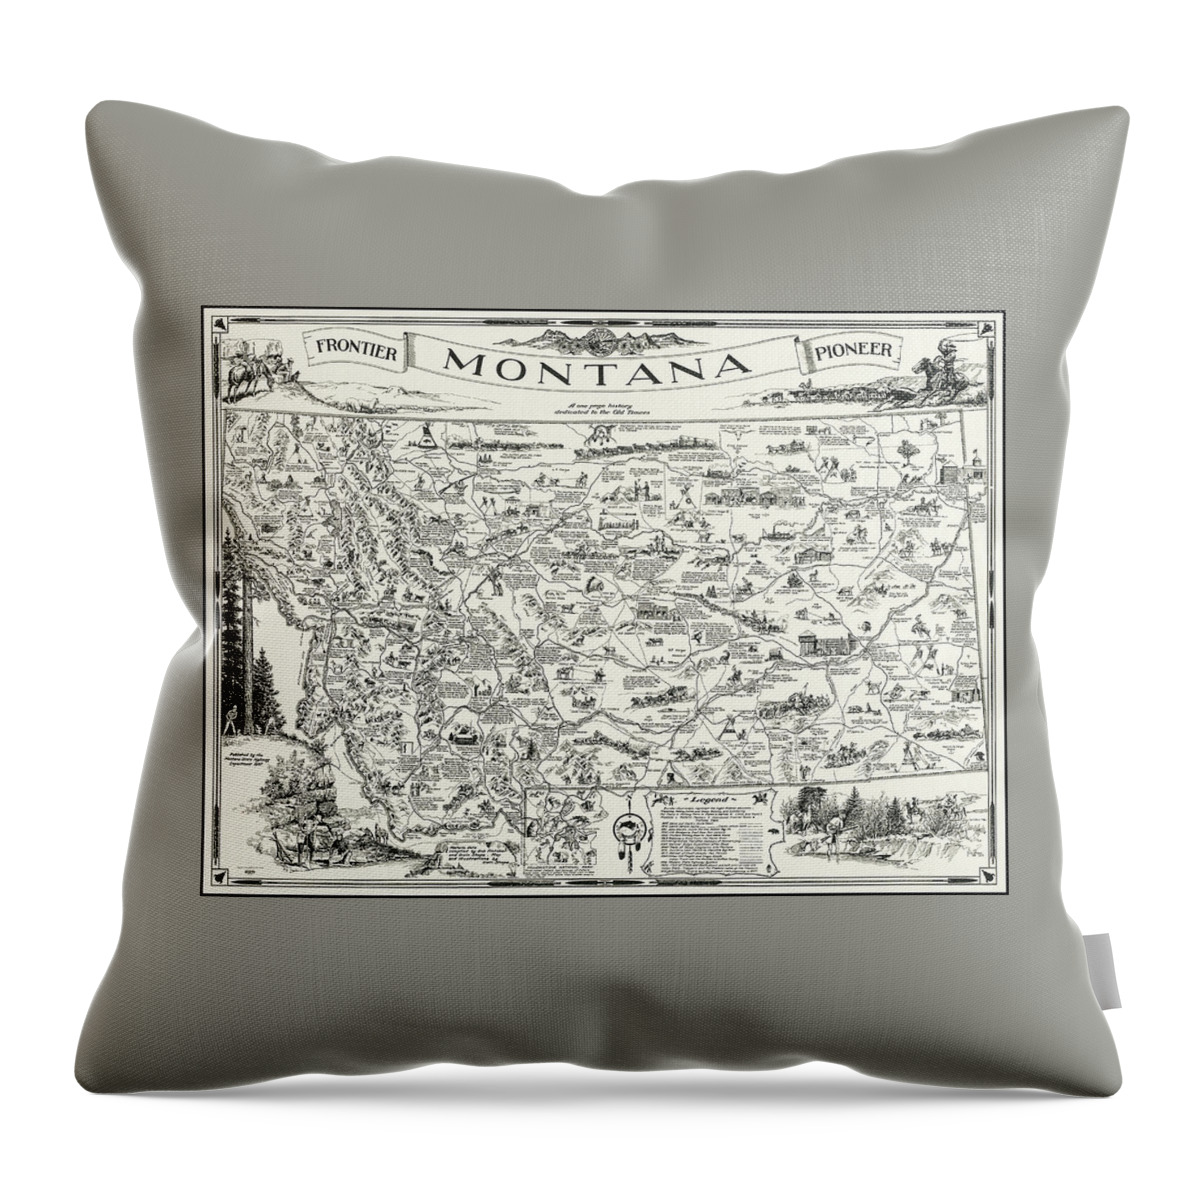 Montana Map Throw Pillow featuring the photograph Vintage Montana Frontier Pioneer Map 1937 by Carol Japp